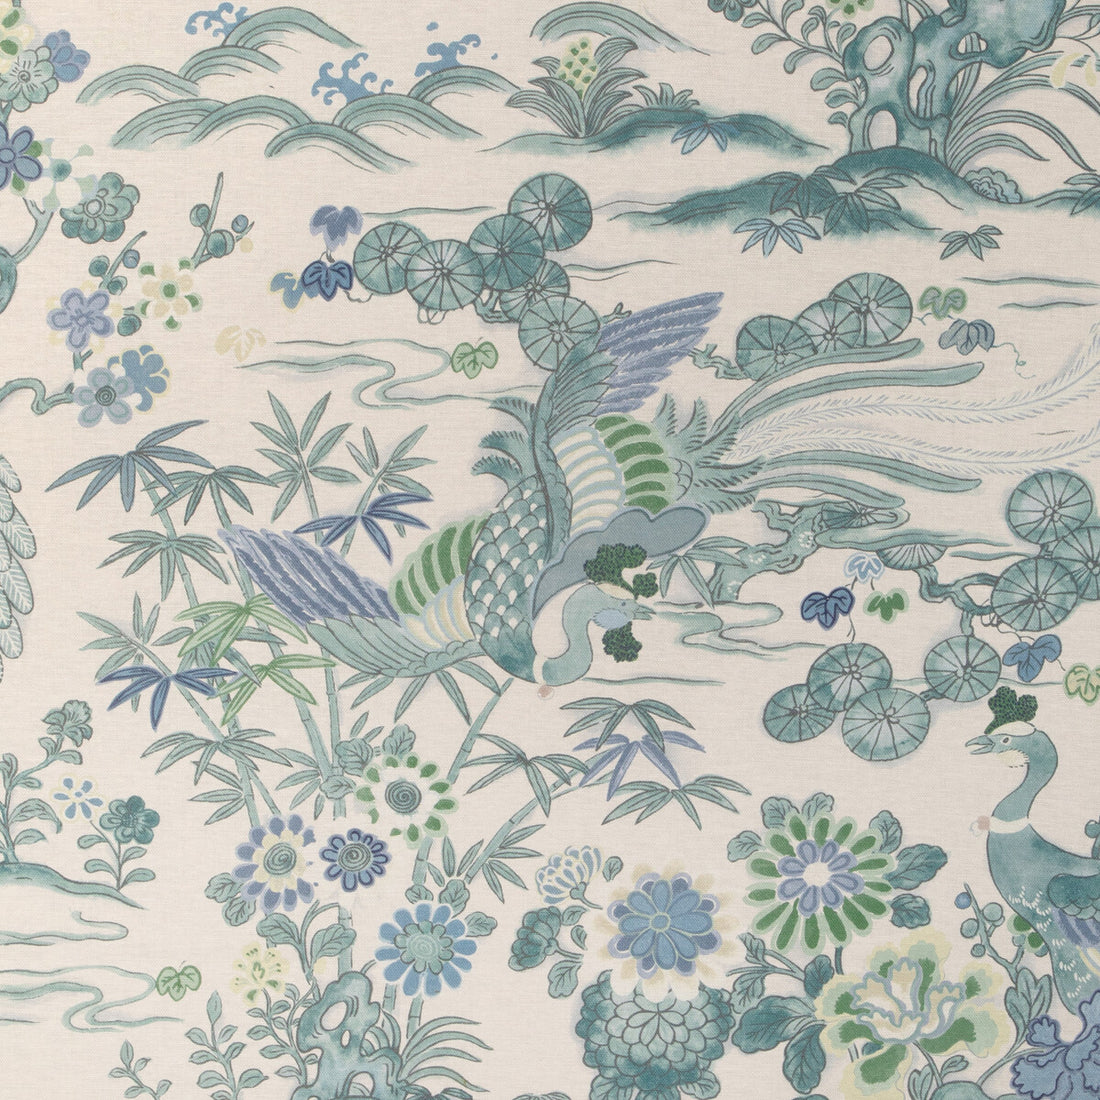 Sakura Print fabric in teal color - pattern 2023139.353.0 - by Lee Jofa in the Garden Walk collection